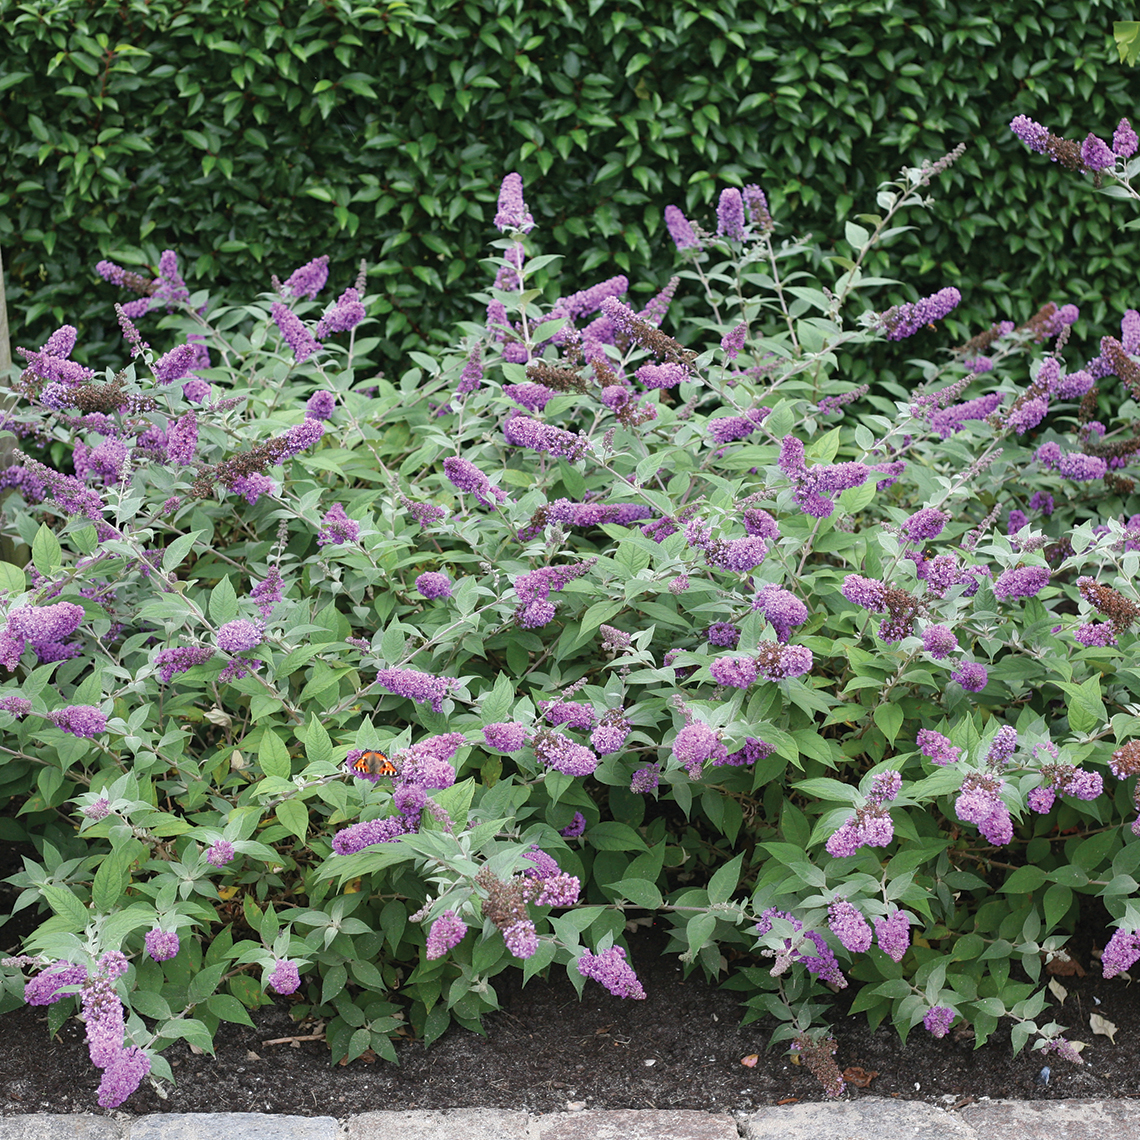 Planting of low-growing Lo & Behold Blue Chip Buddleia